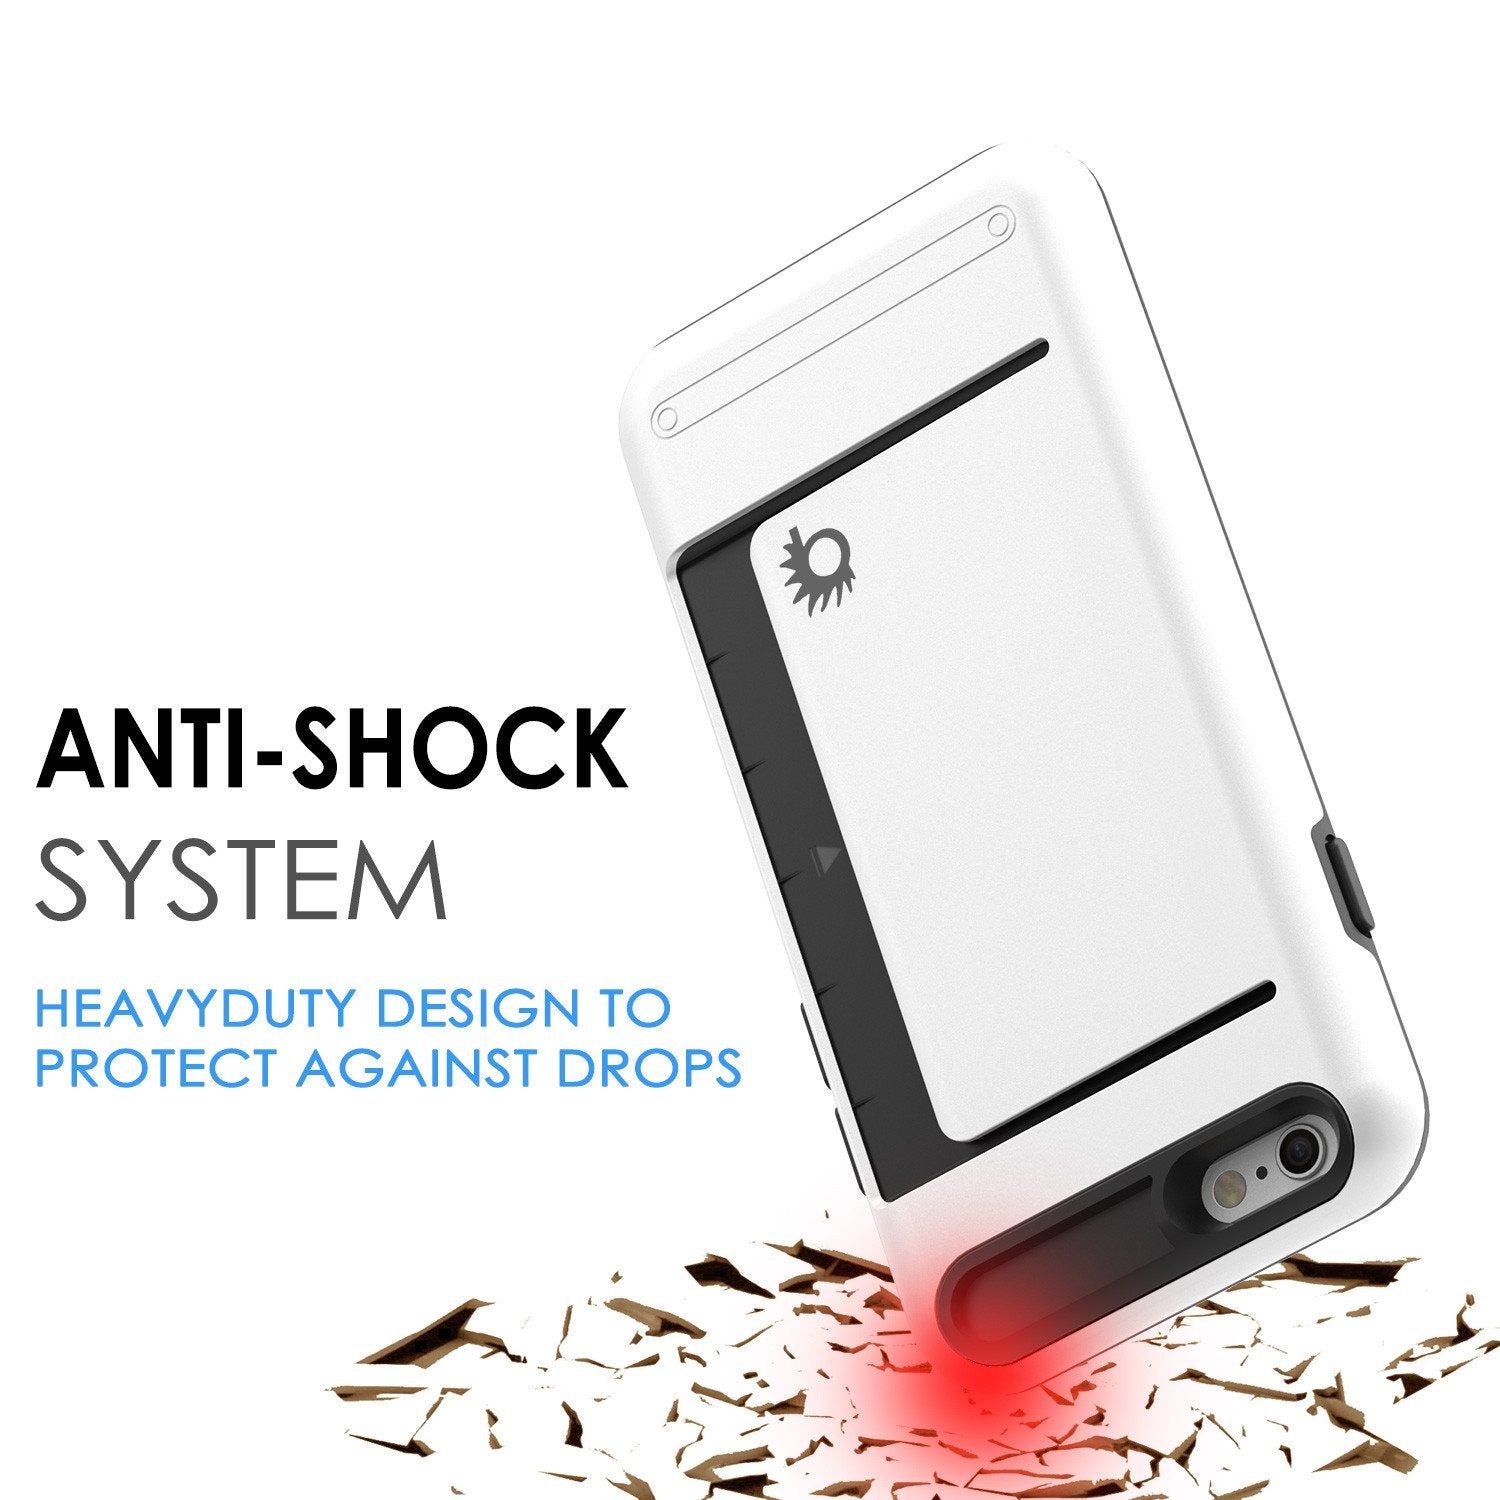 iPhone 6/6s Case PunkCase CLUTCH White Series Slim Armor Soft Cover Case w/ Tempered Glass